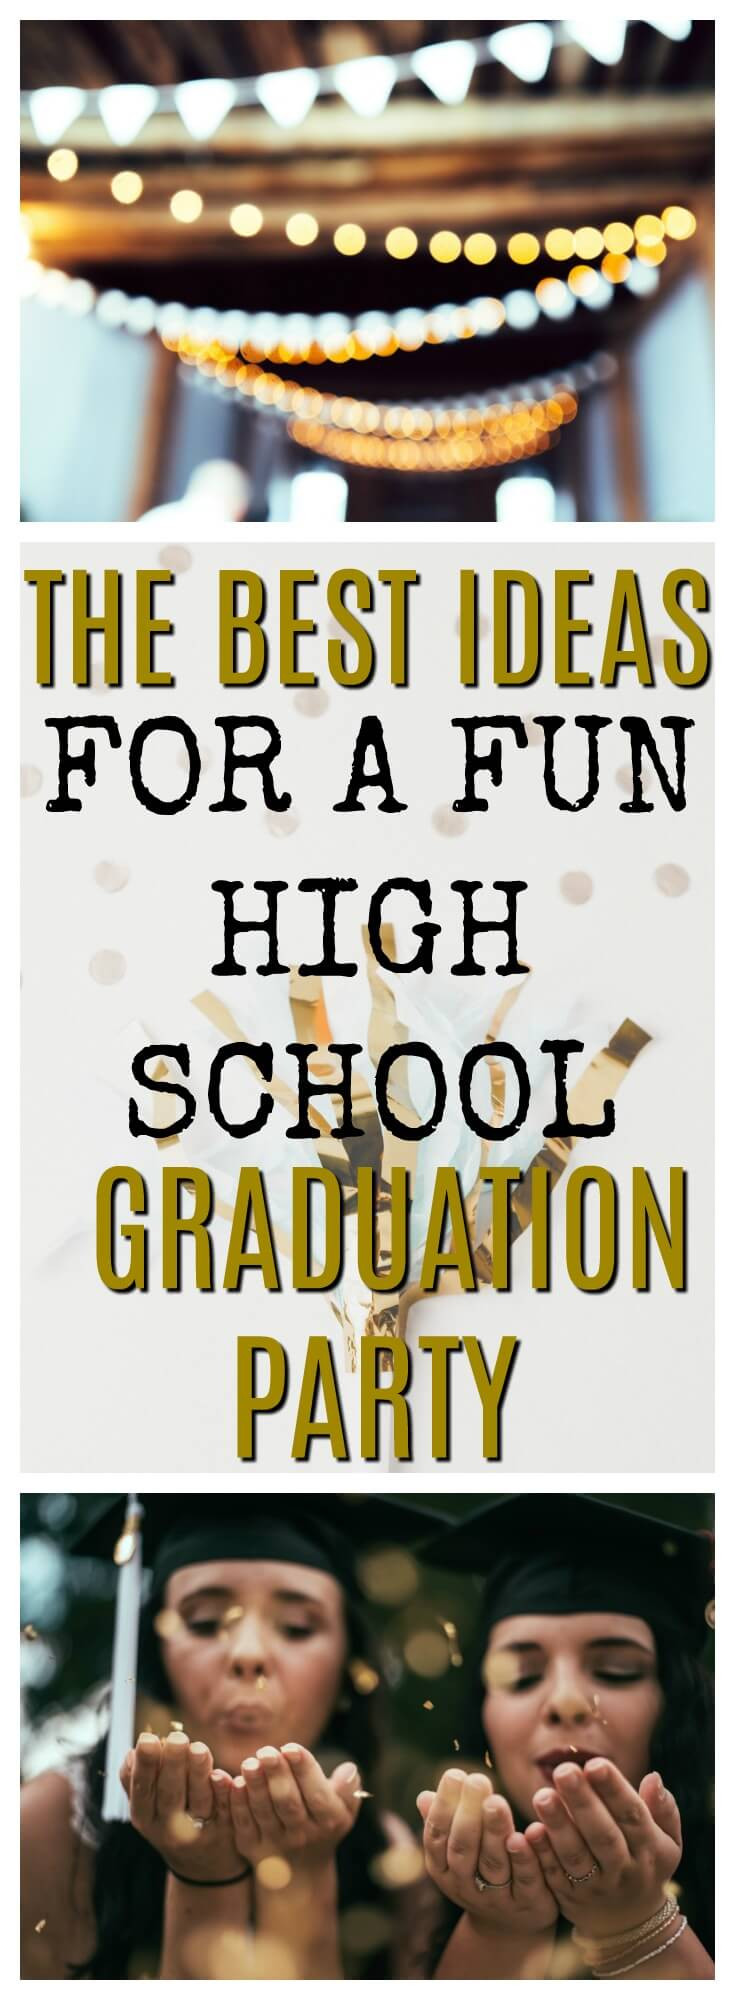 Fun Graduation Ideas For Party
 Graduation Party Ideas 2019 How to Celebrate [step by step]